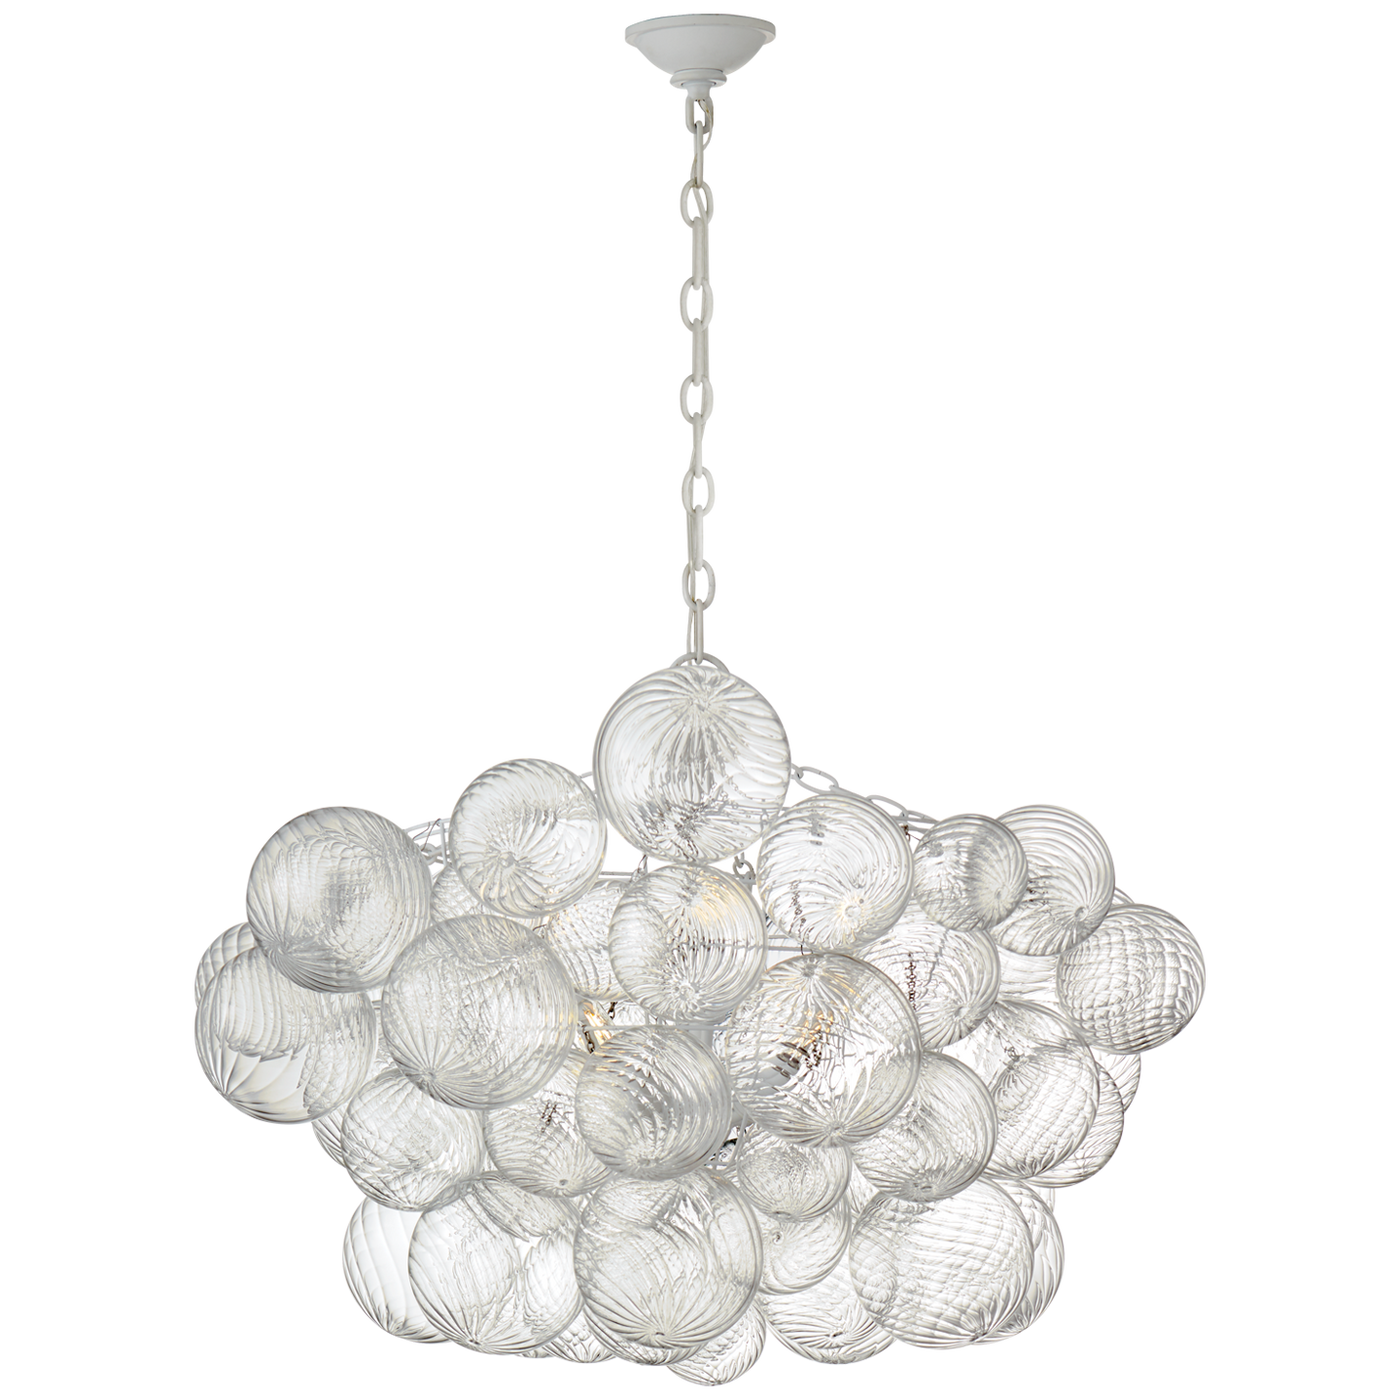 CHANDELIER PLASTER WHITE & CLEAR SWIRLED GLASS LARGE